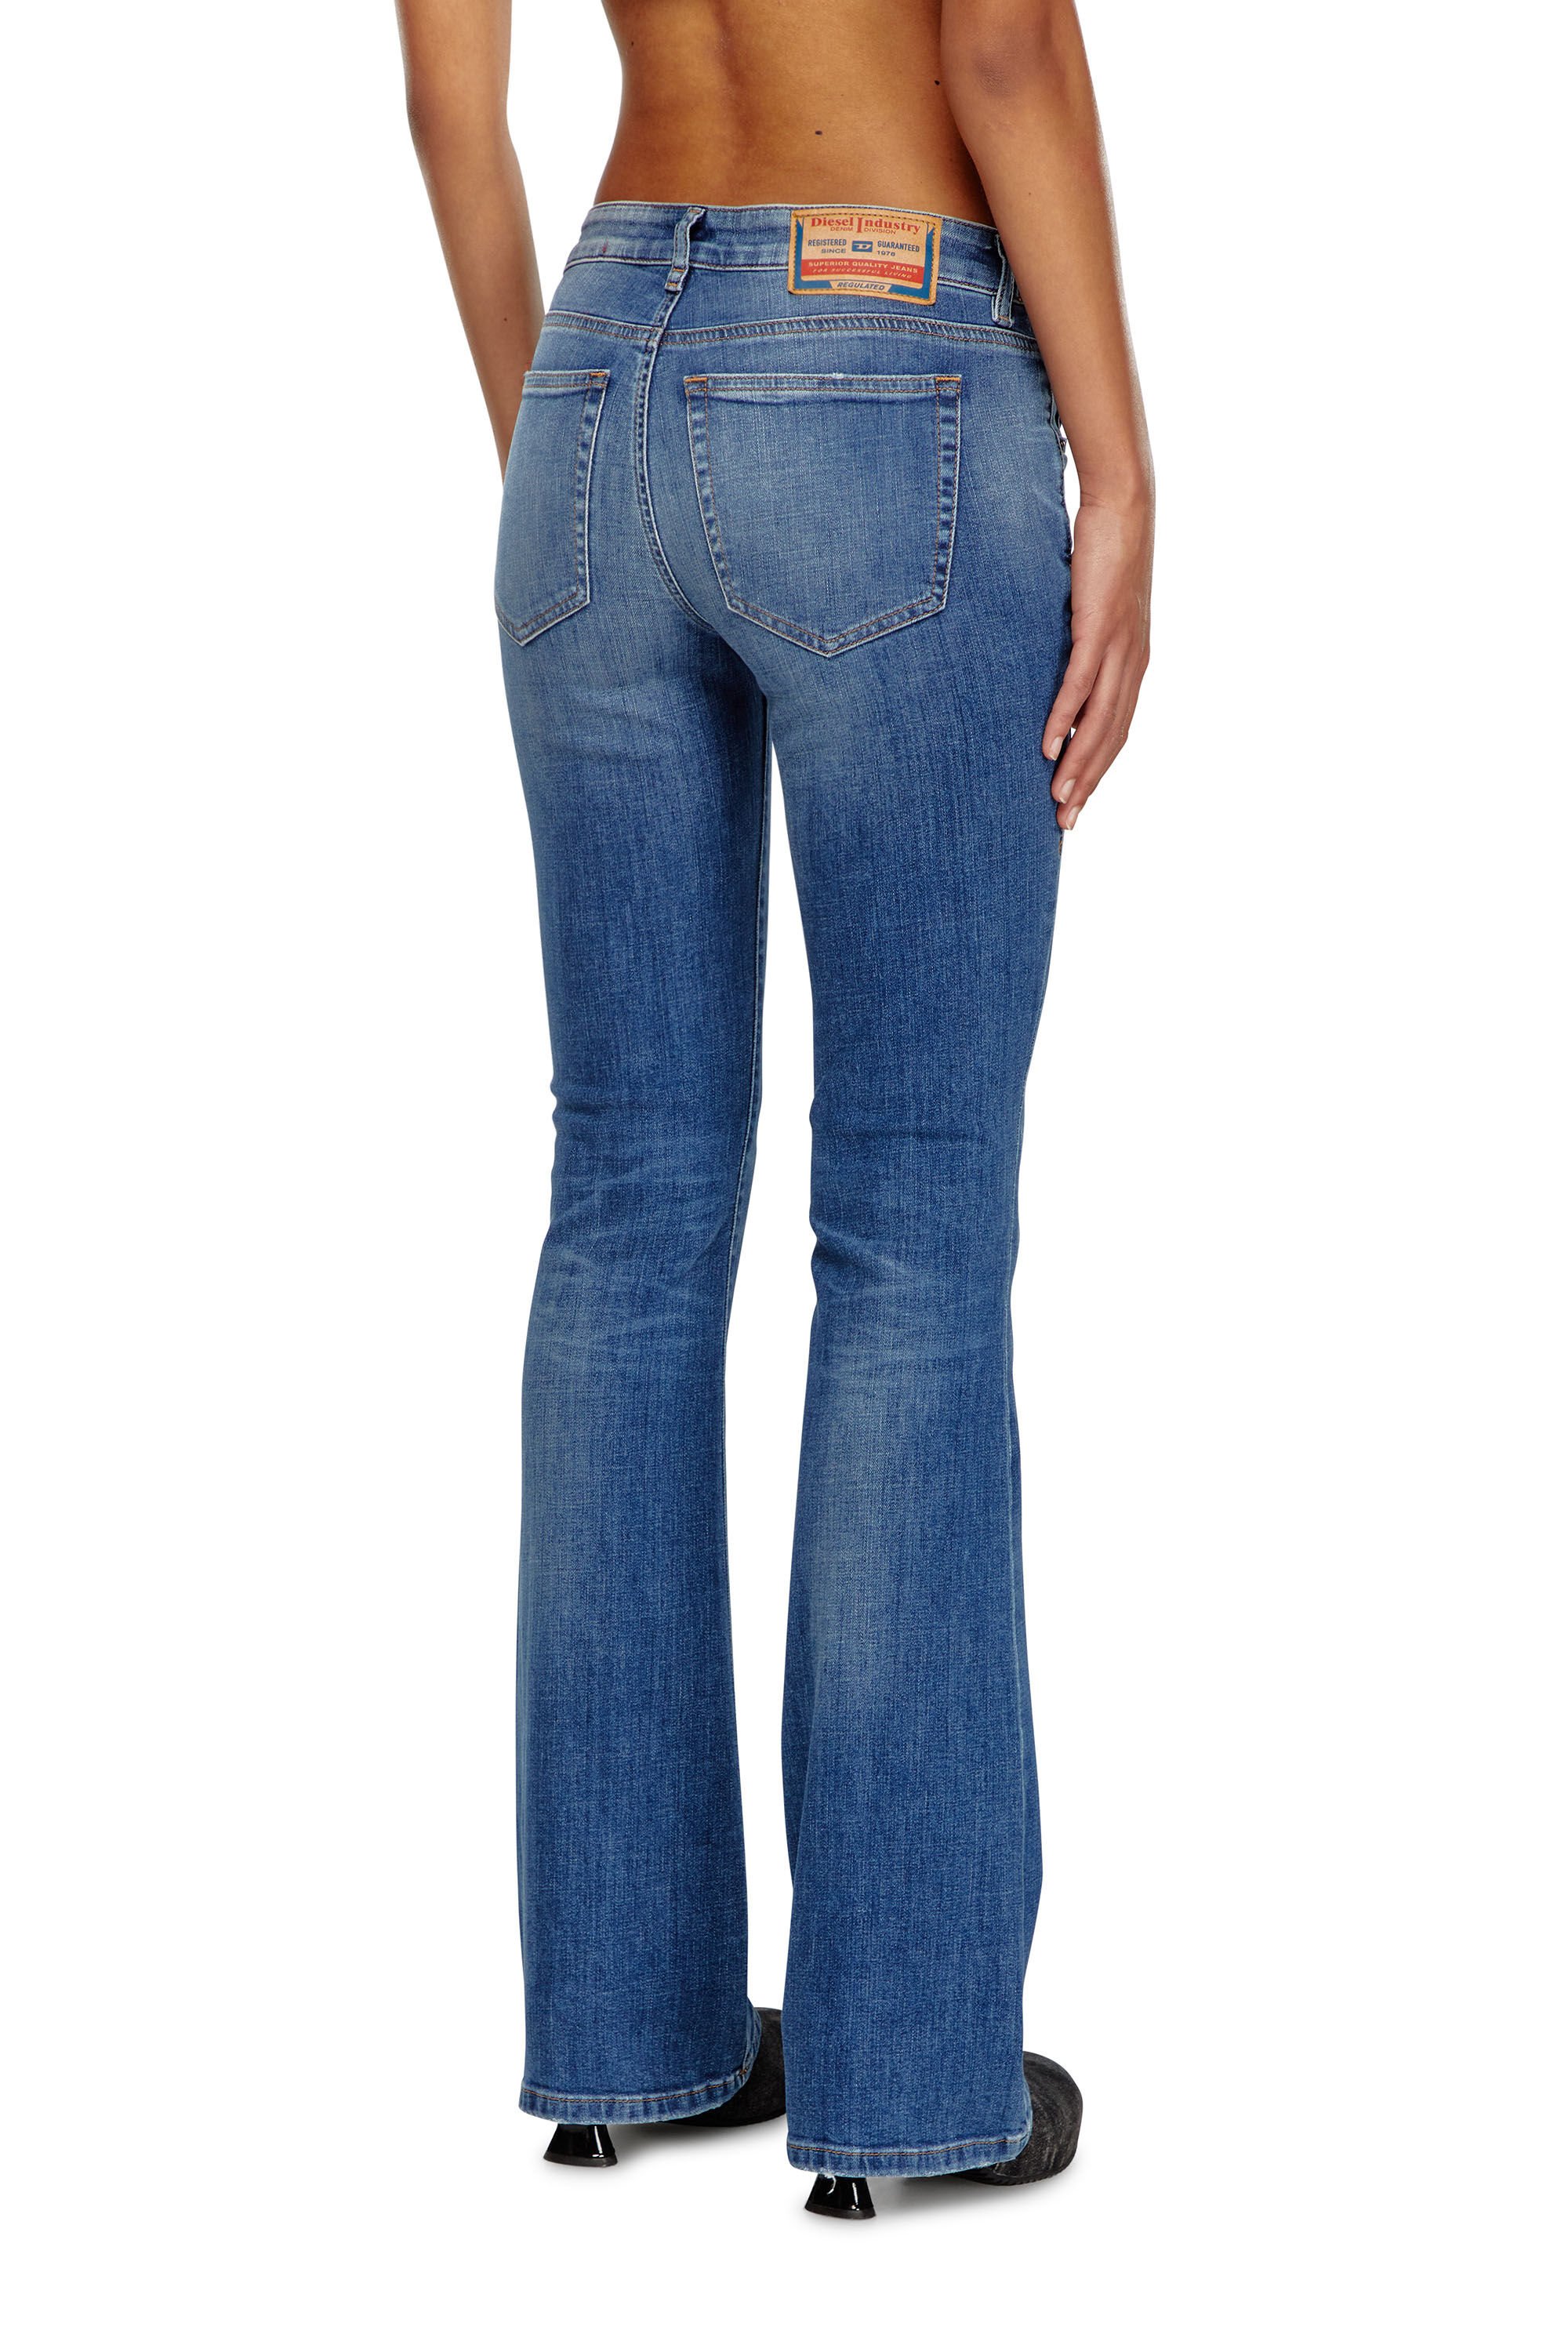 Diesel - Bootcut and Flare Jeans 1969 D-Ebbey 09J33, Mujer Bootcut y Flare Jeans - 1969 D-Ebbey in Azul marino - Image 4